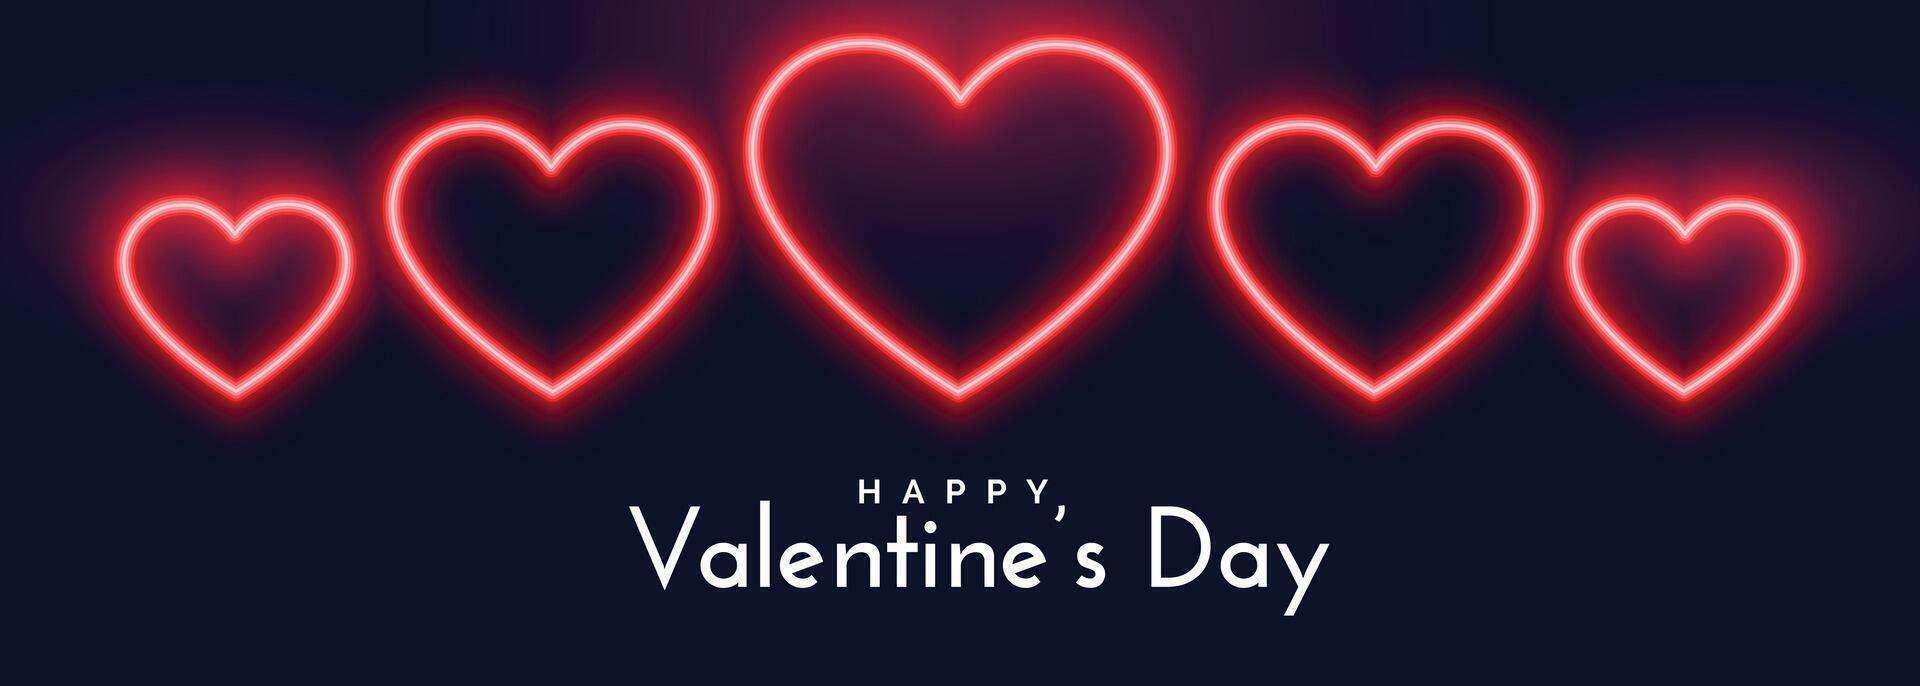 beautiful neon hearts banner for valentines day vector